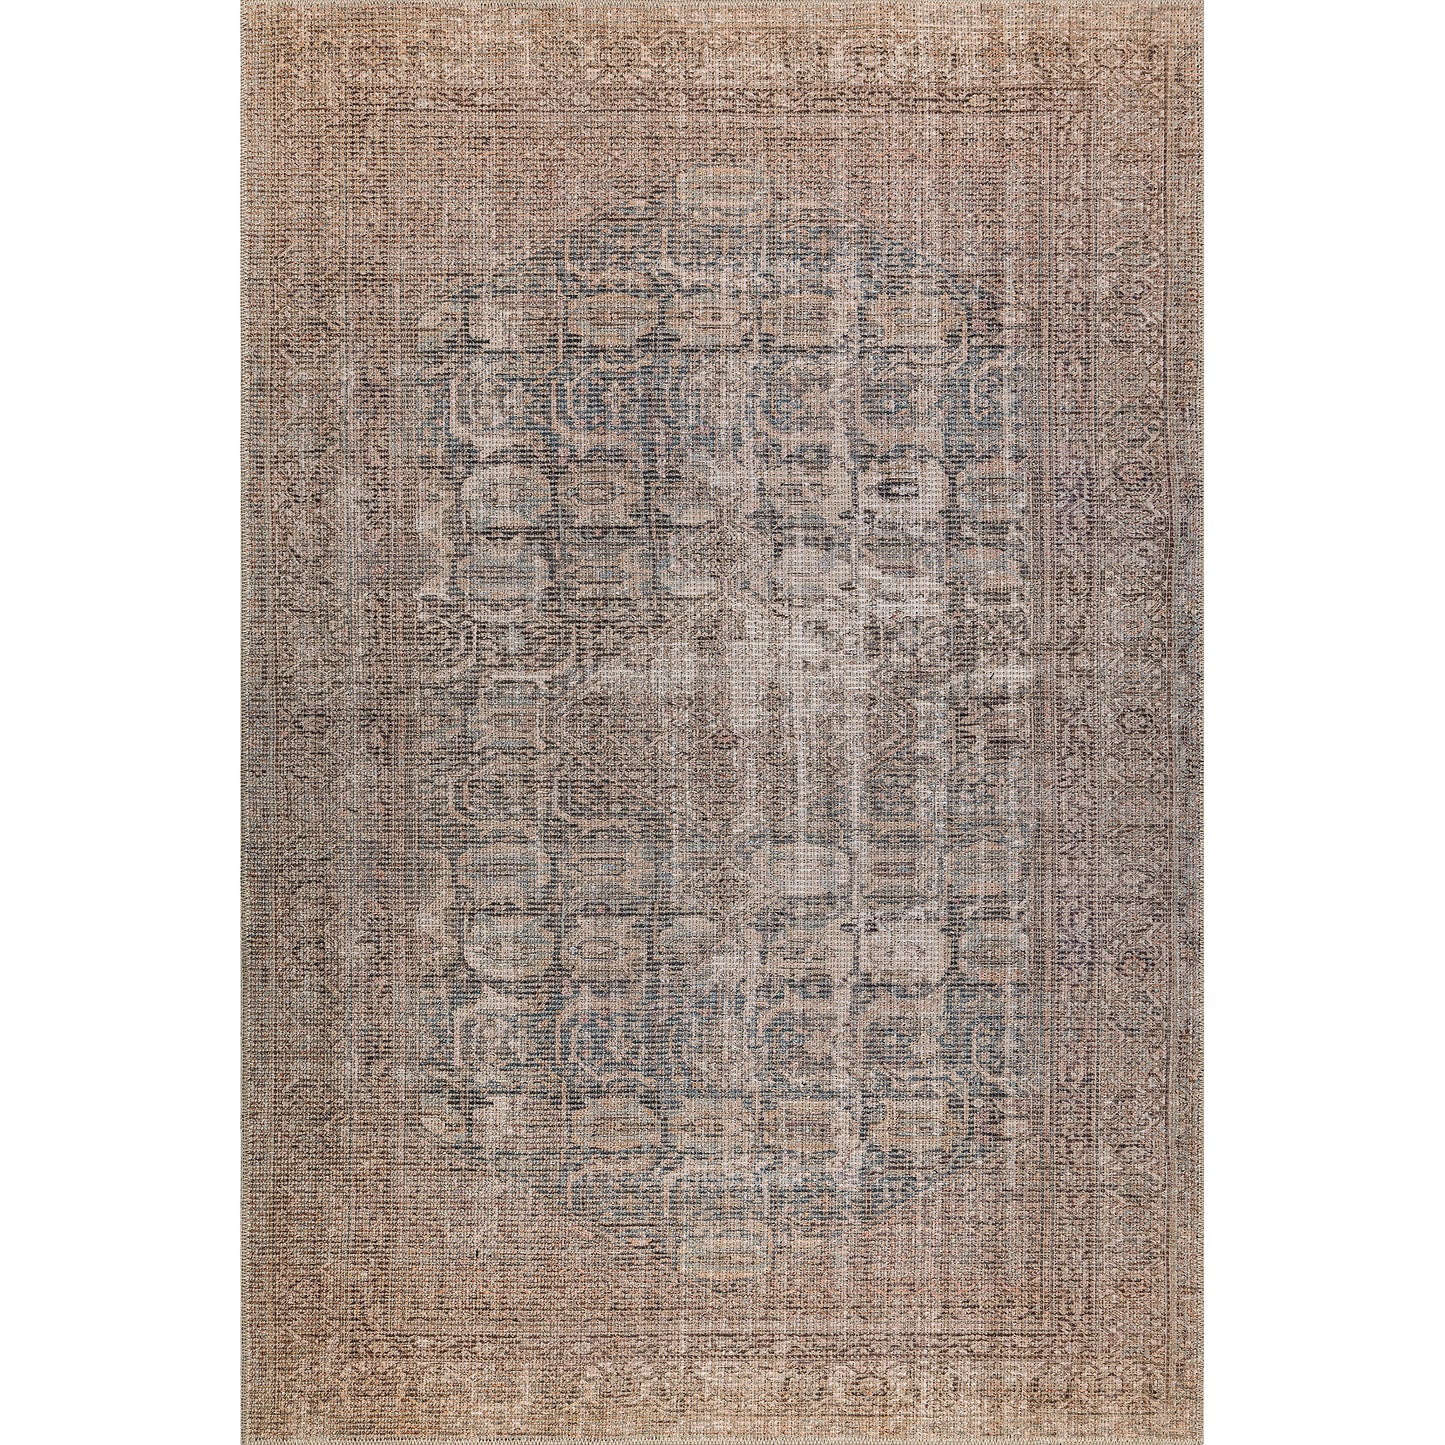 blue cotton and polyster machine washable traditional rustic area rug 2x8, 3x10, 2x10 ft Long Runner Rug, Hallway, Balcony, Entry Way, Kitchen, Stairs